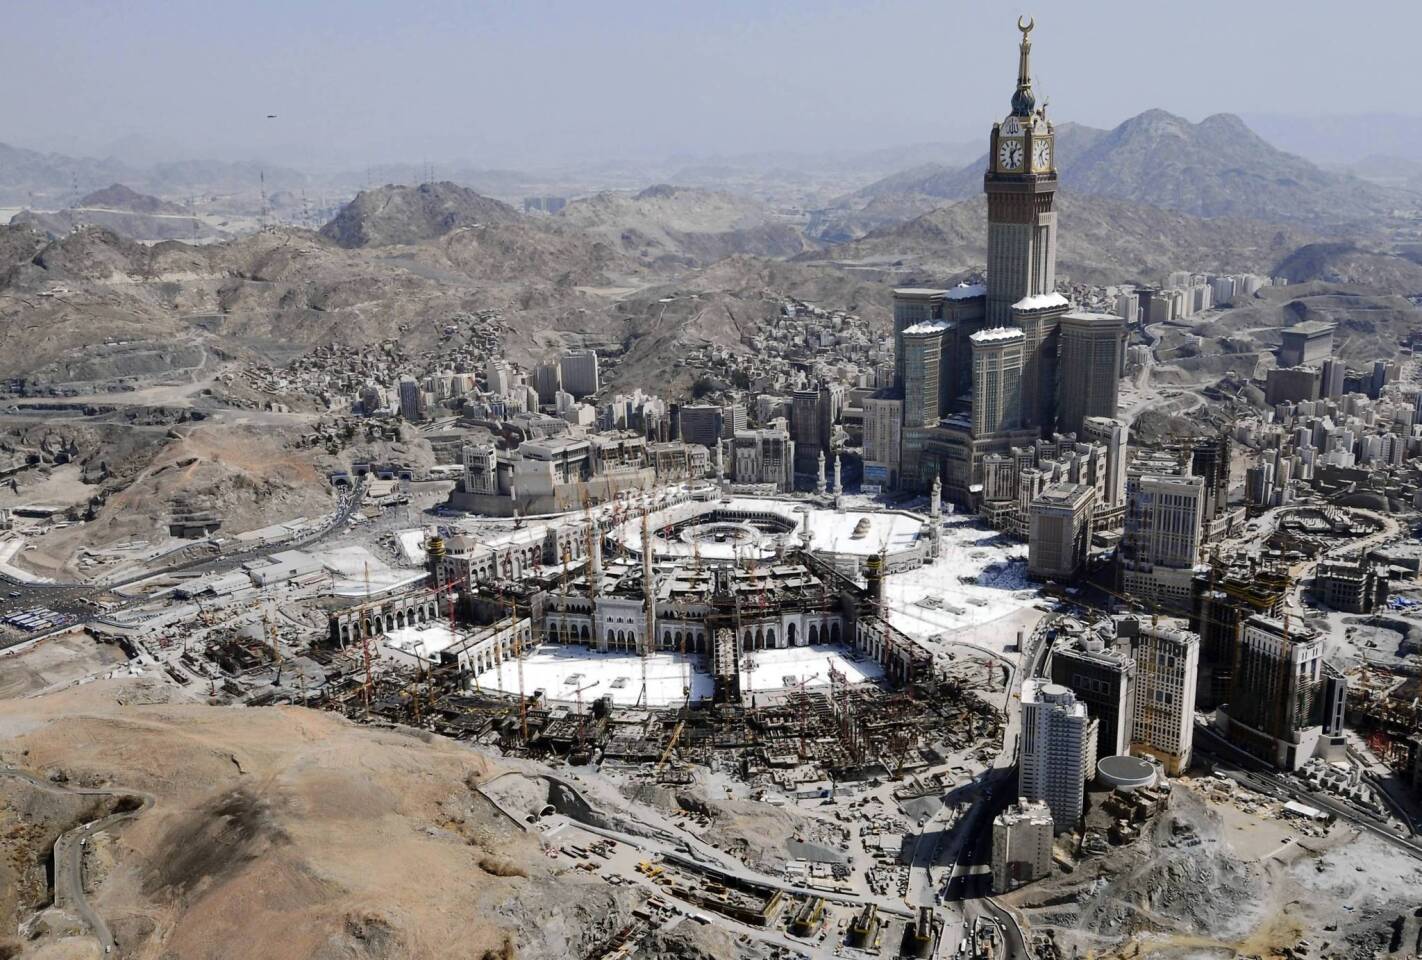 No. 2 Clock Tower and the Grand Mosque in the holy city of Mecca, Saudi Arabia stands at 1,972 feet.